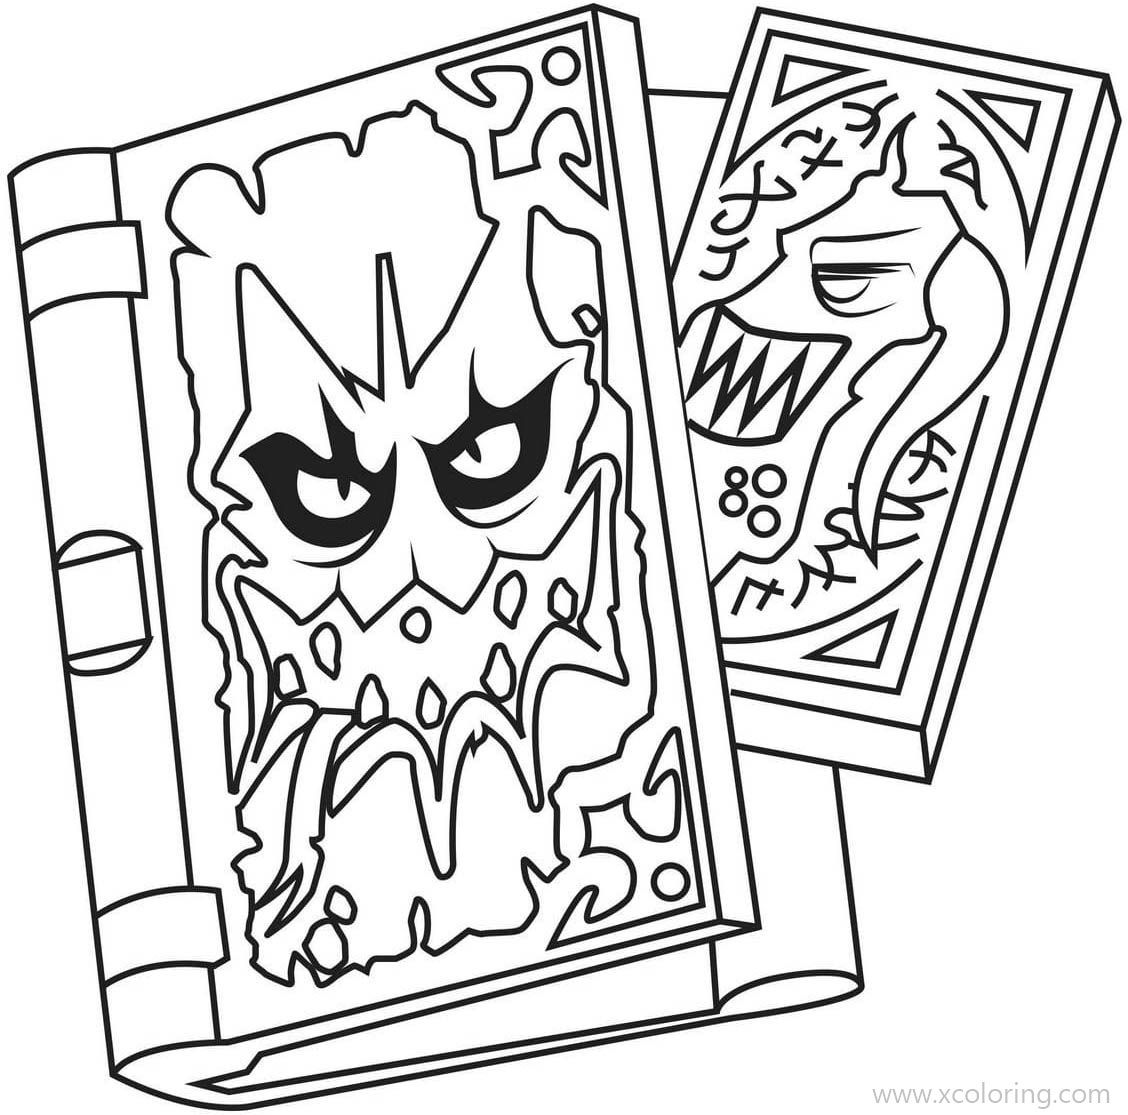 Free Book of Monsters from LEGO NEXO Knights Coloring Pages printable